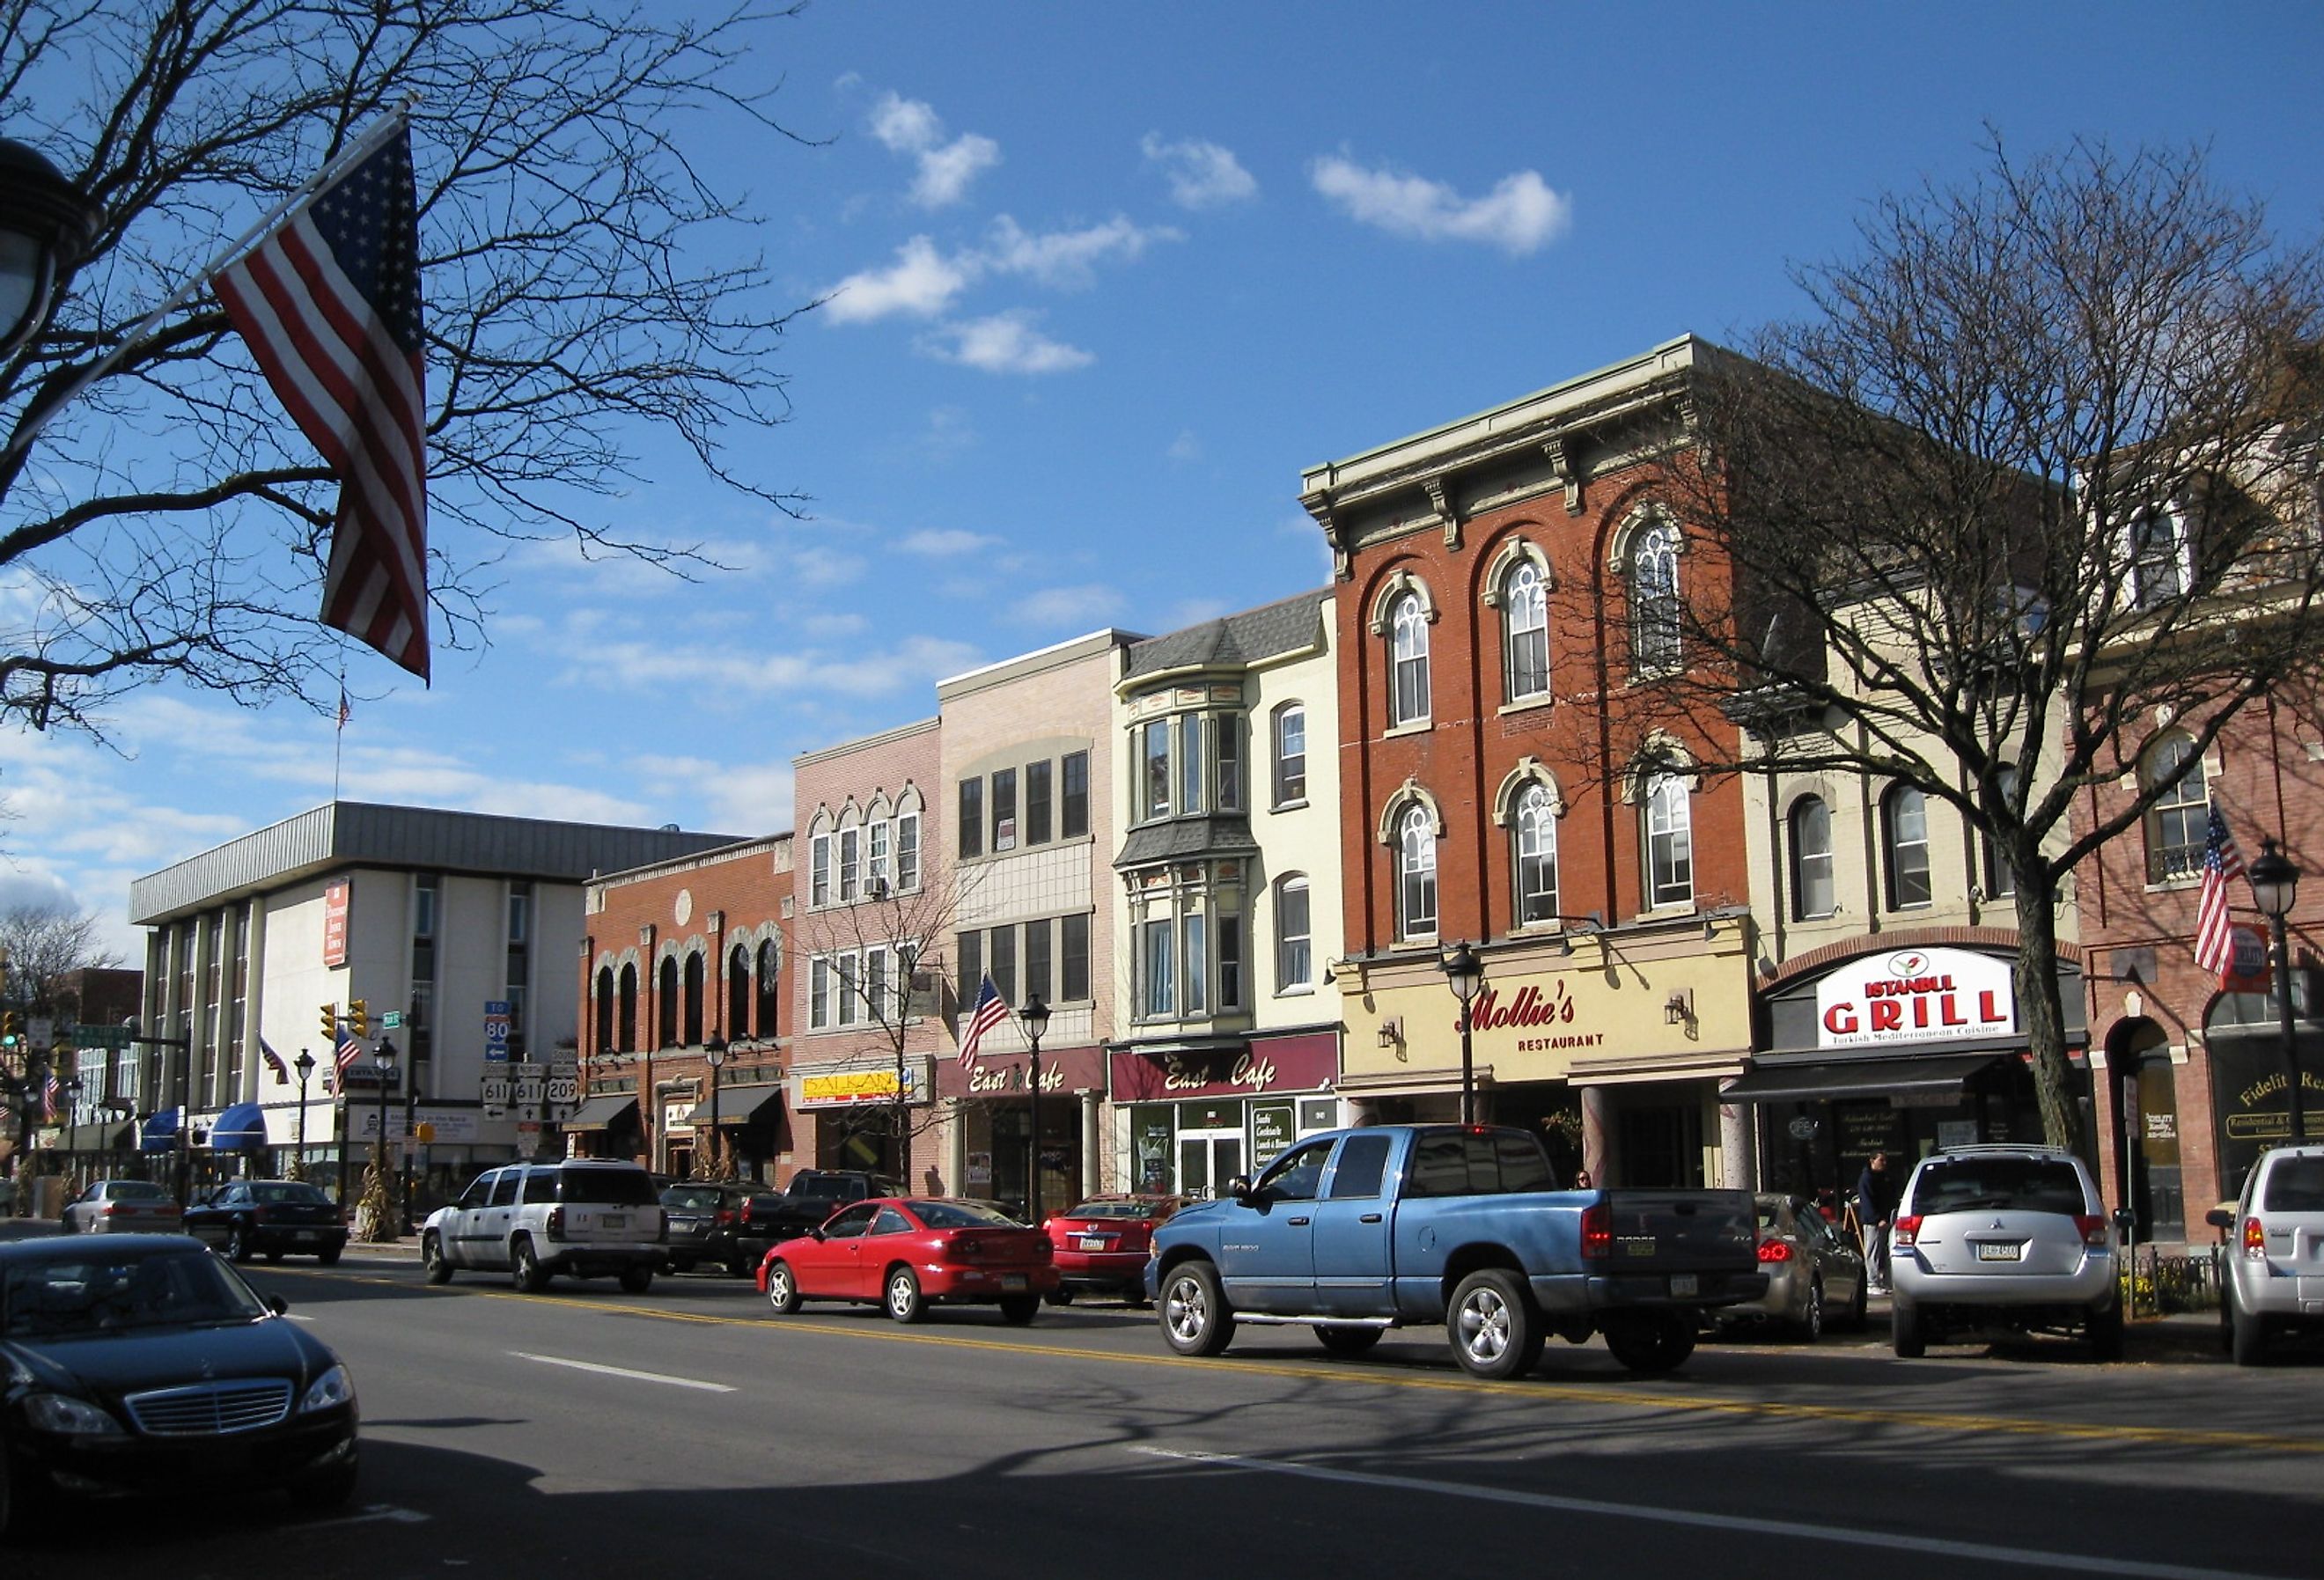 Downtown street of Stroudsburg, Pennsylvania. Image credit Doug Kerr from Albany, NY, United States, CC BY-SA 2.0 <https://creativecommons.org/licenses/by-sa/2.0>, via Wikimedia Commons